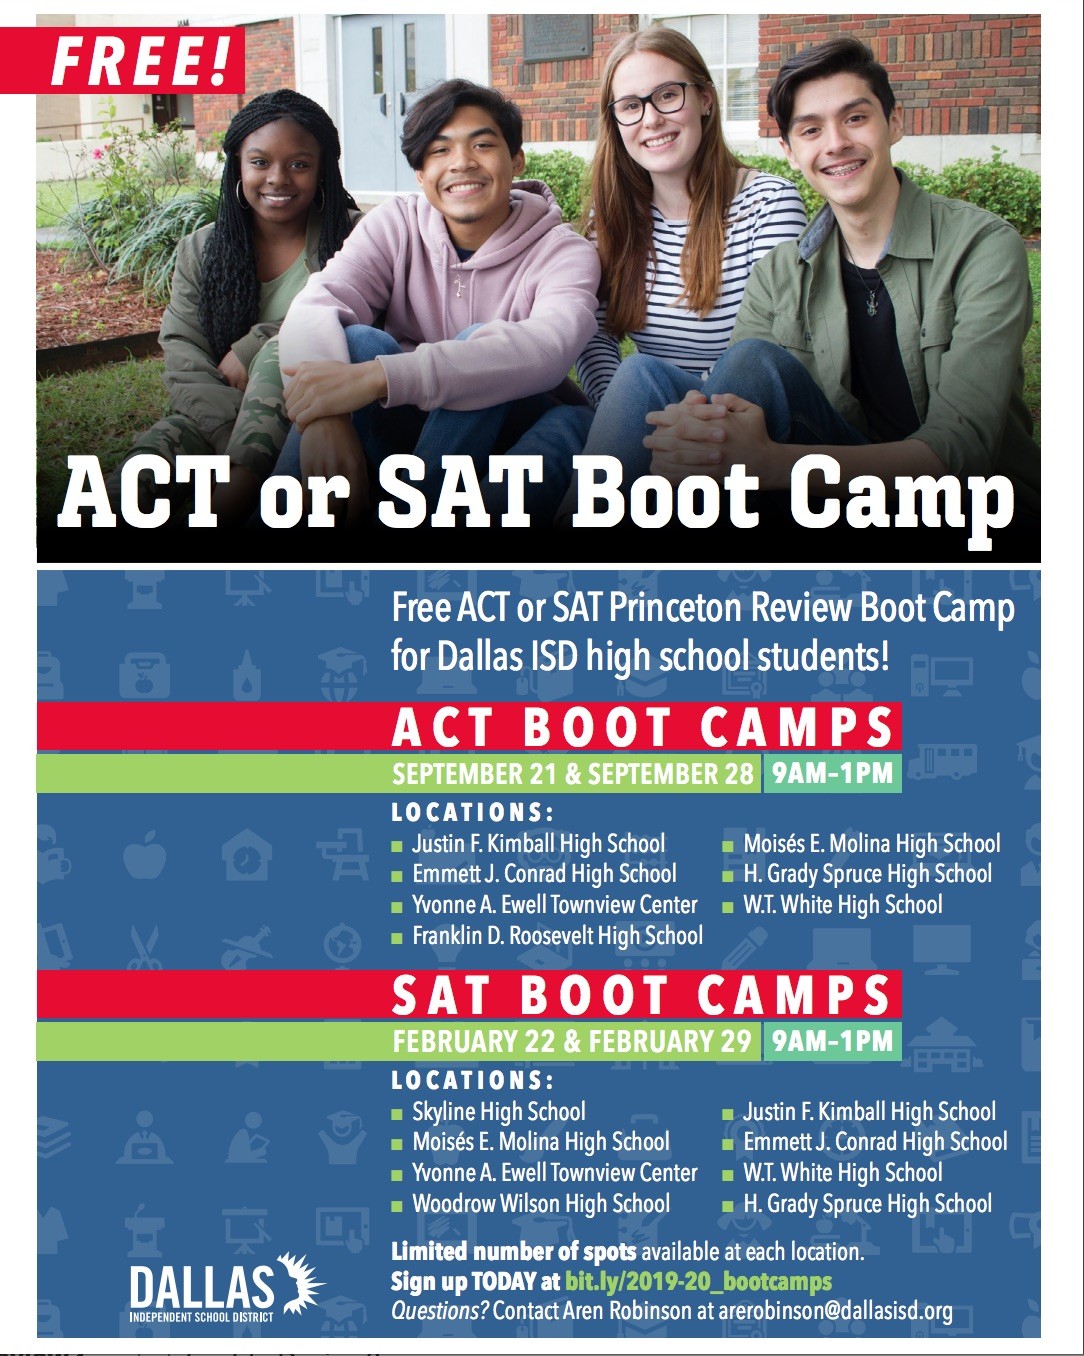 High school students invited to a free SAT boot camp later this month